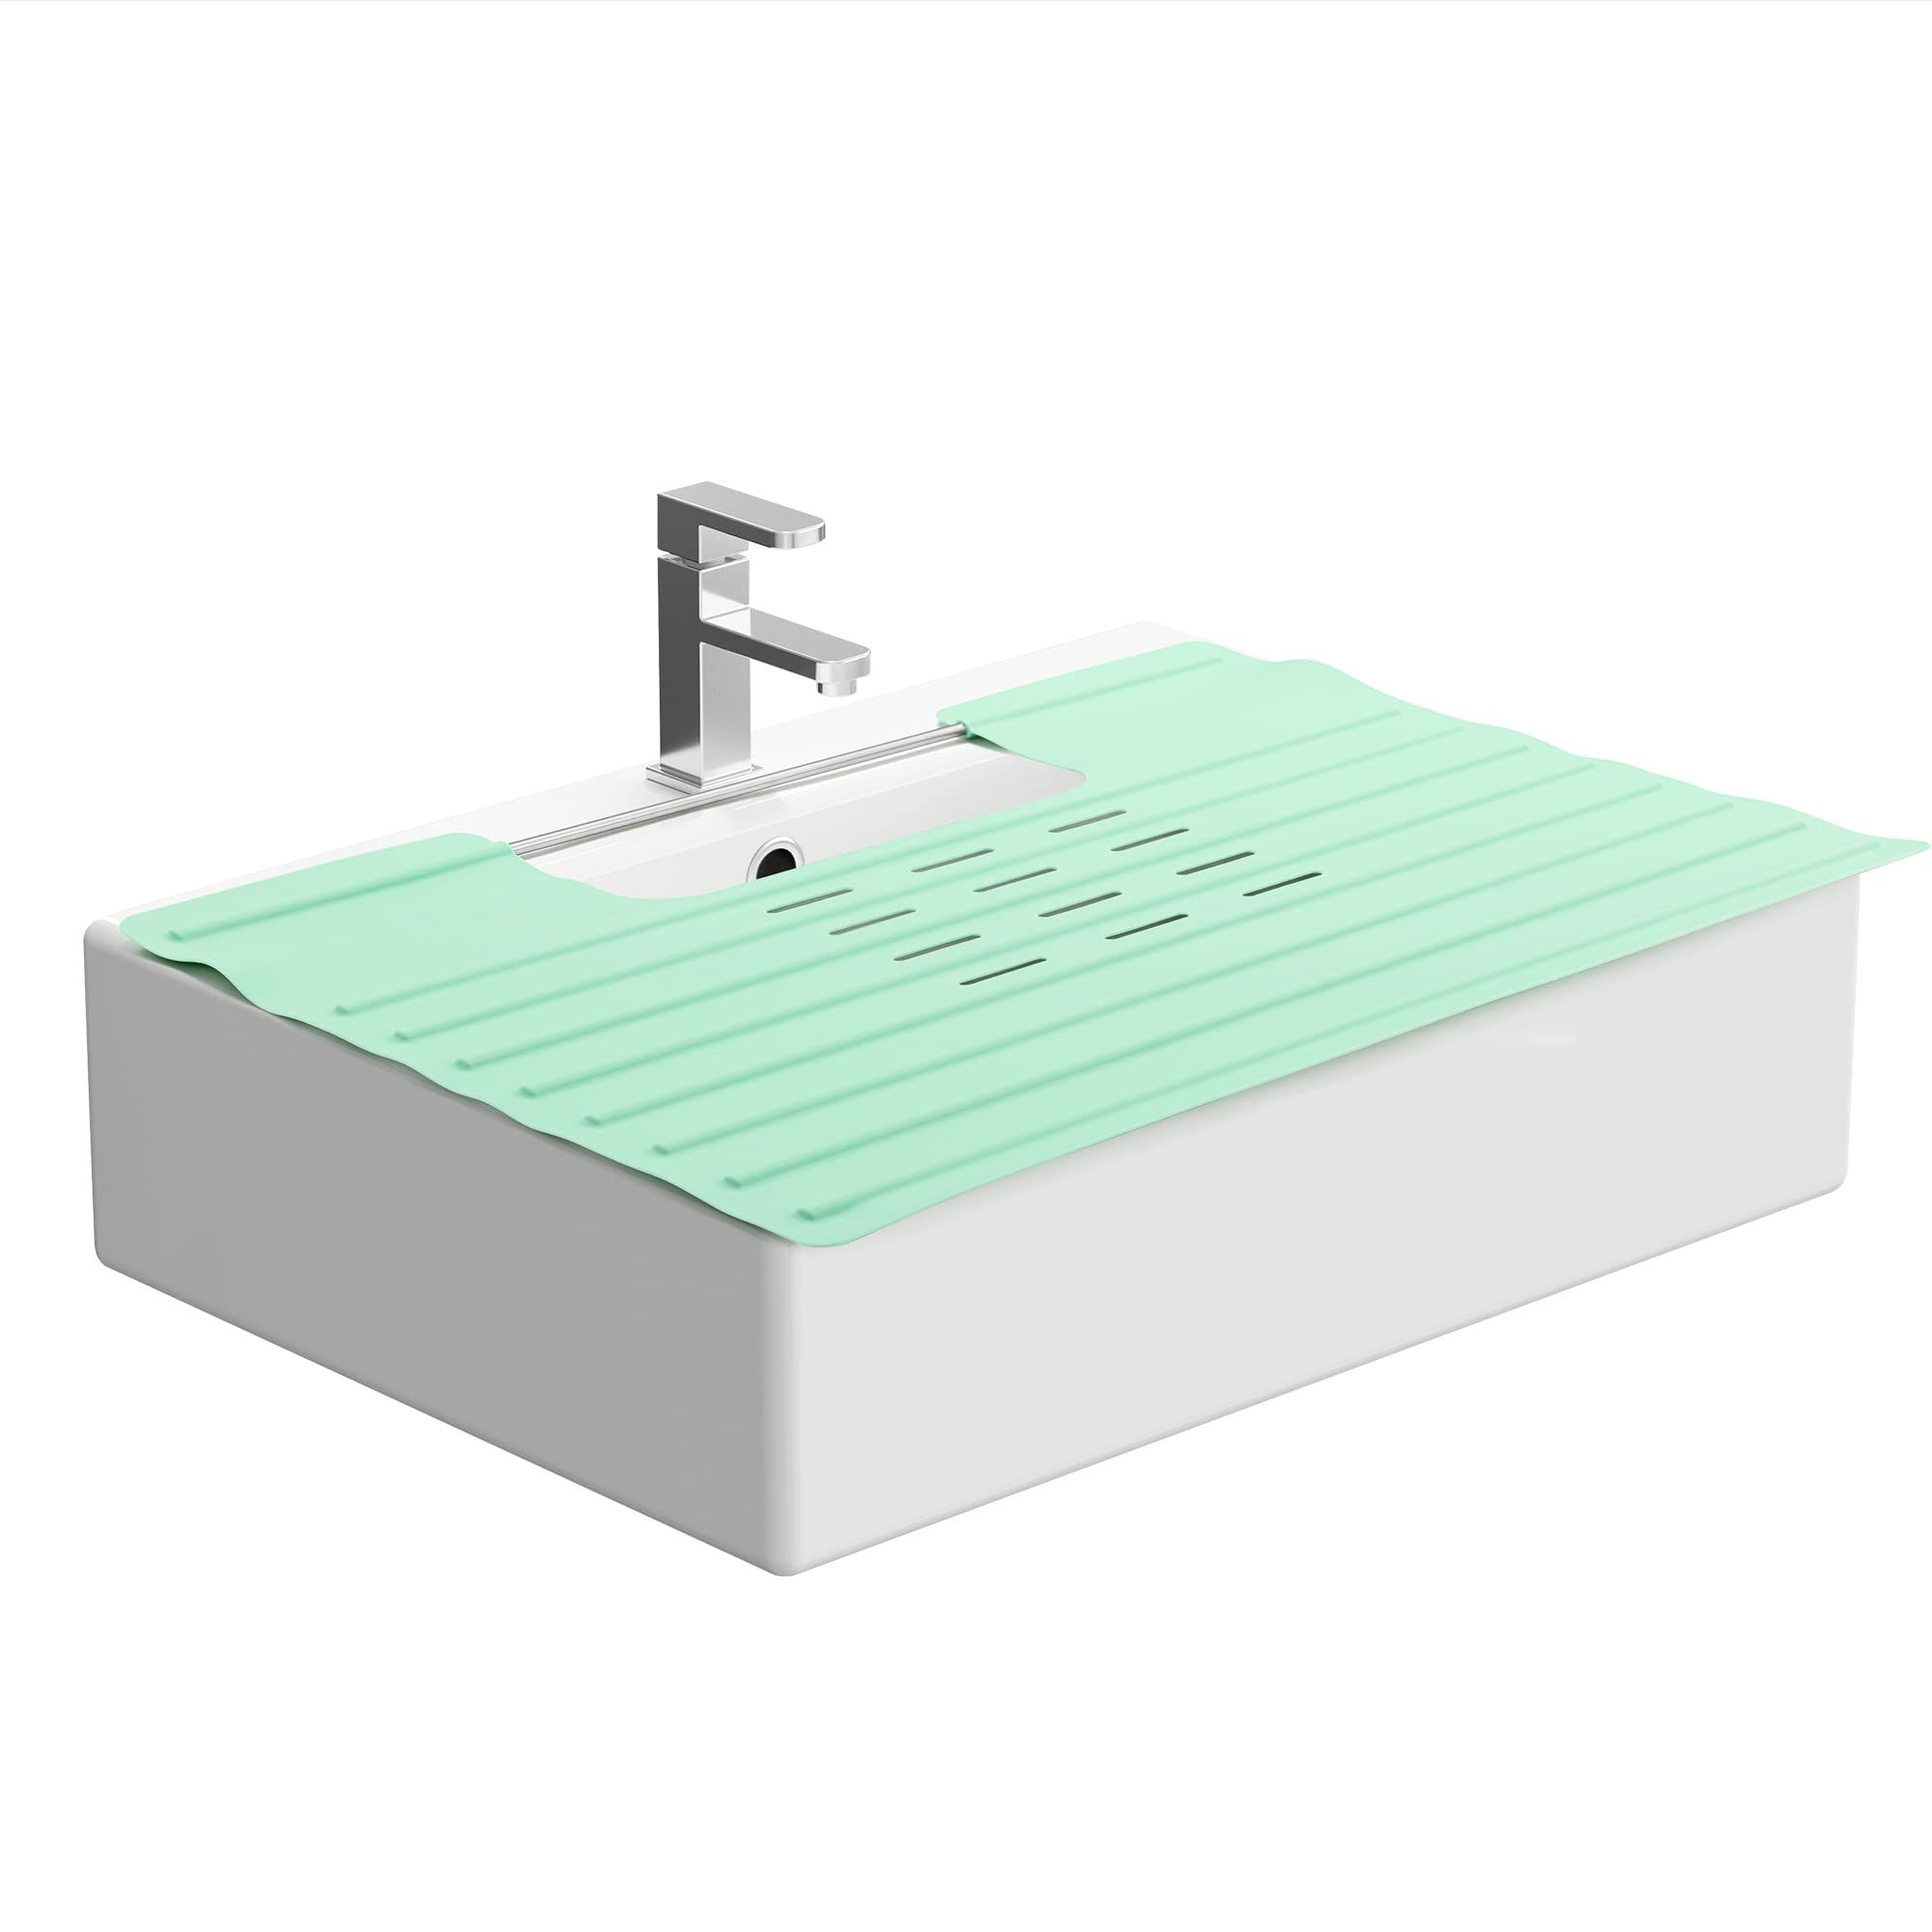 Bathroom Sink Cover for Counter Space - Heat Resistant Silicone Mat & Makeup Mat for Your Beauty Rou | Amazon (US)